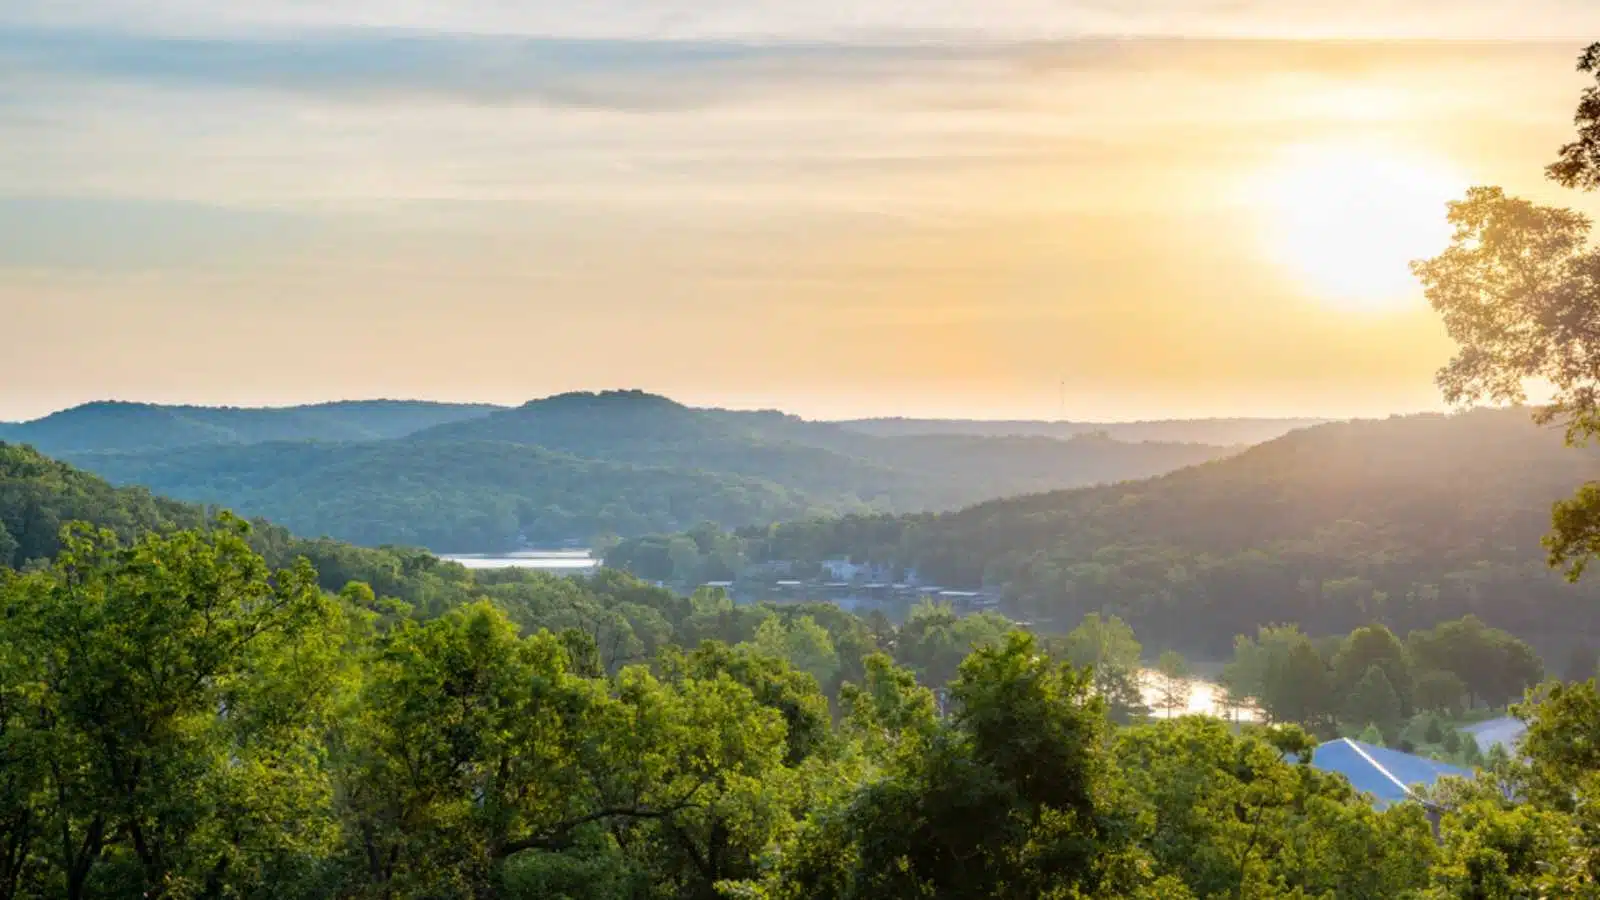 View of Lake of the Ozarks in Missouri at Sunrise